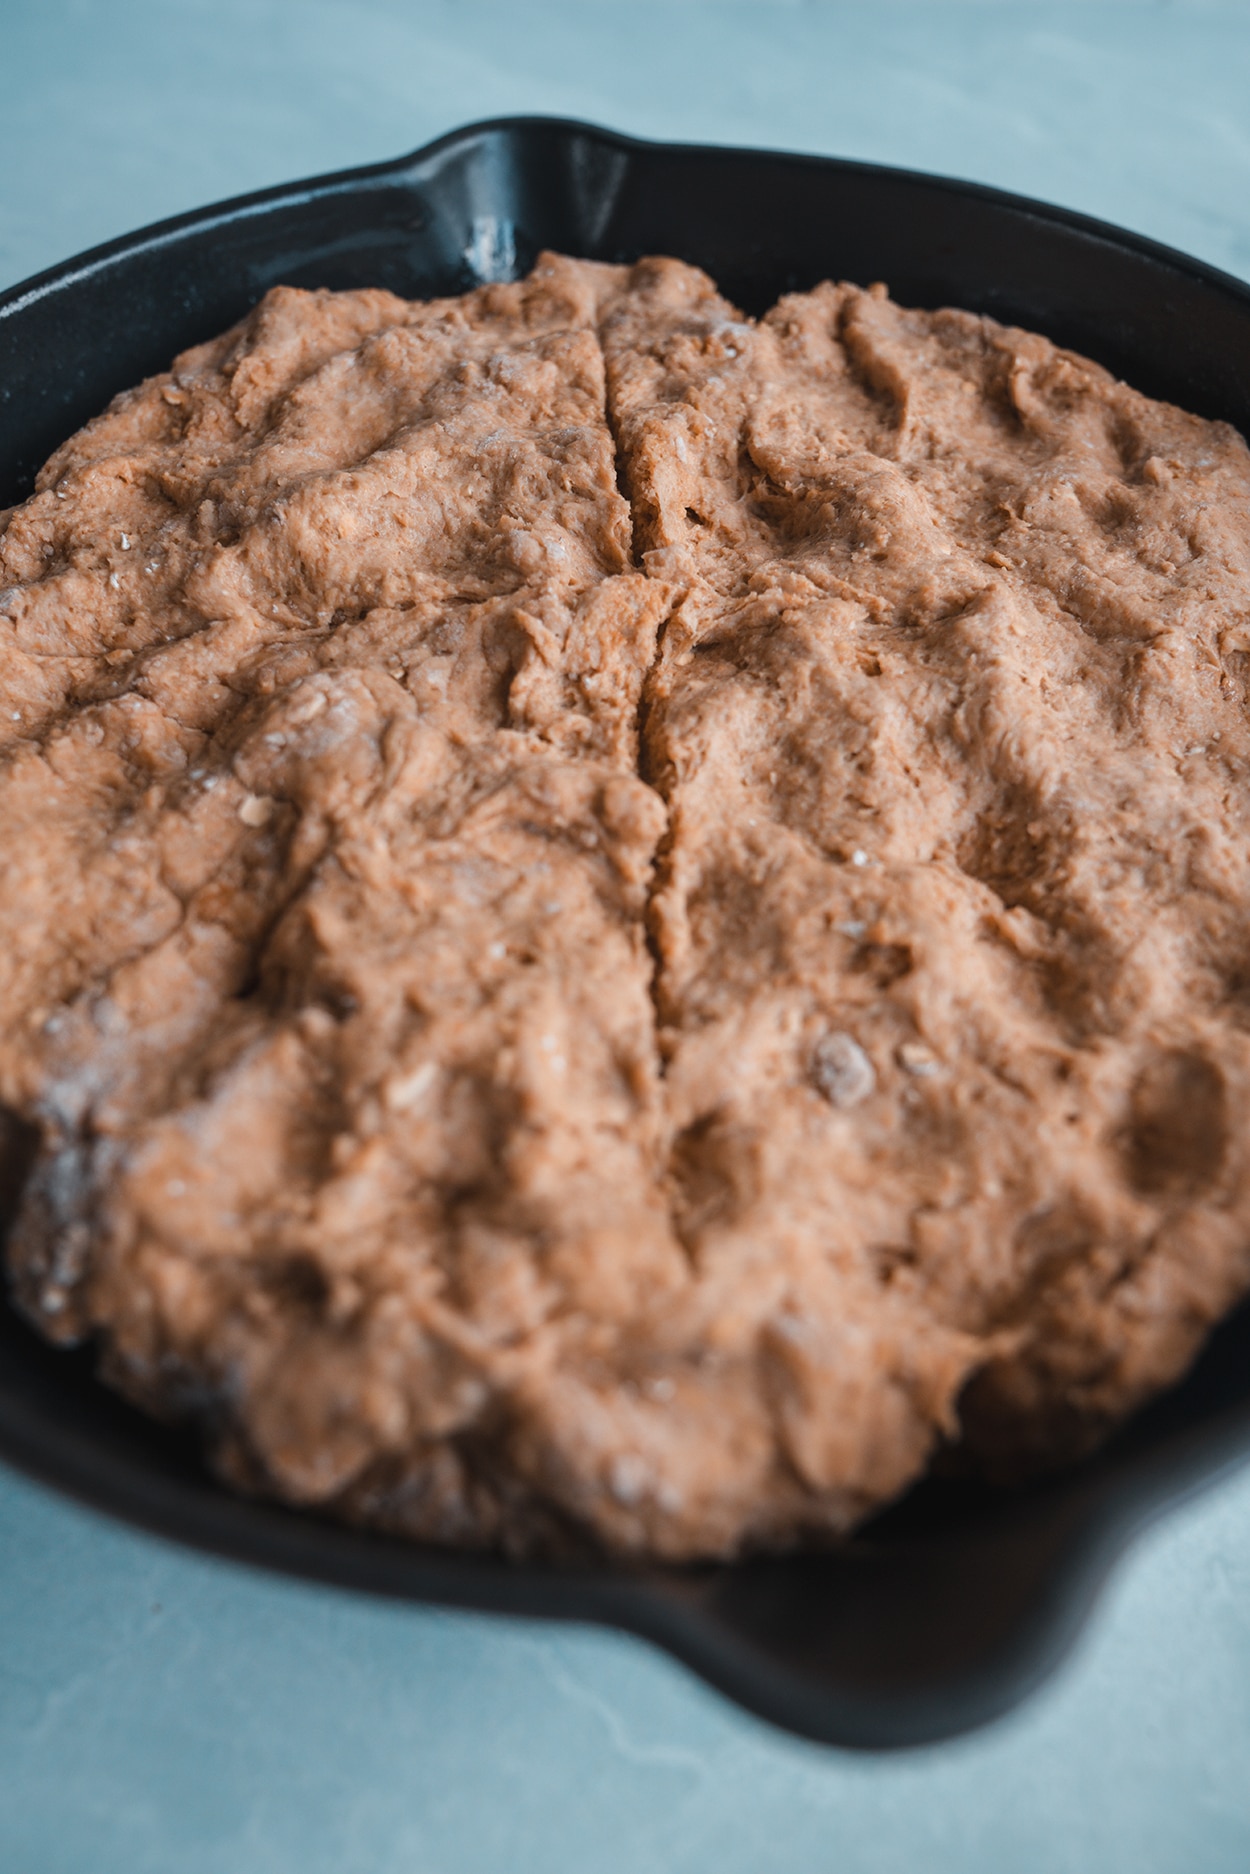 Easy Traditional Irish Brown Bread recipe baked in a skillet - photo by Keryn Means of TwistTravelMag,com